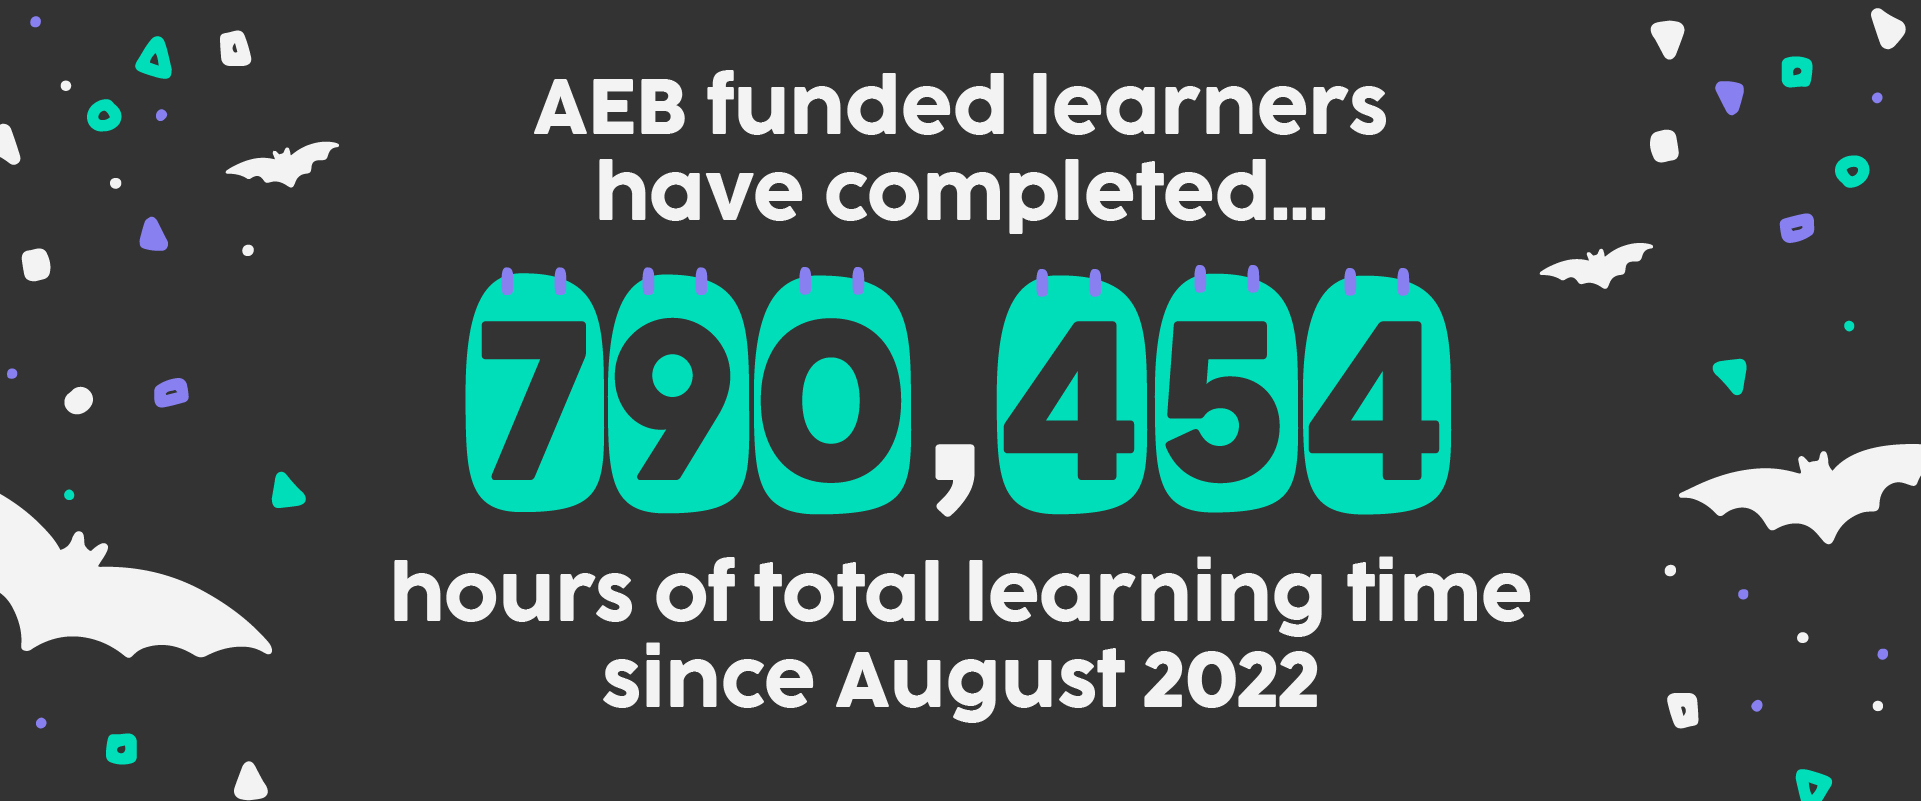 AEB funded learners have completed 790,454 hours of total learning time since August 2022